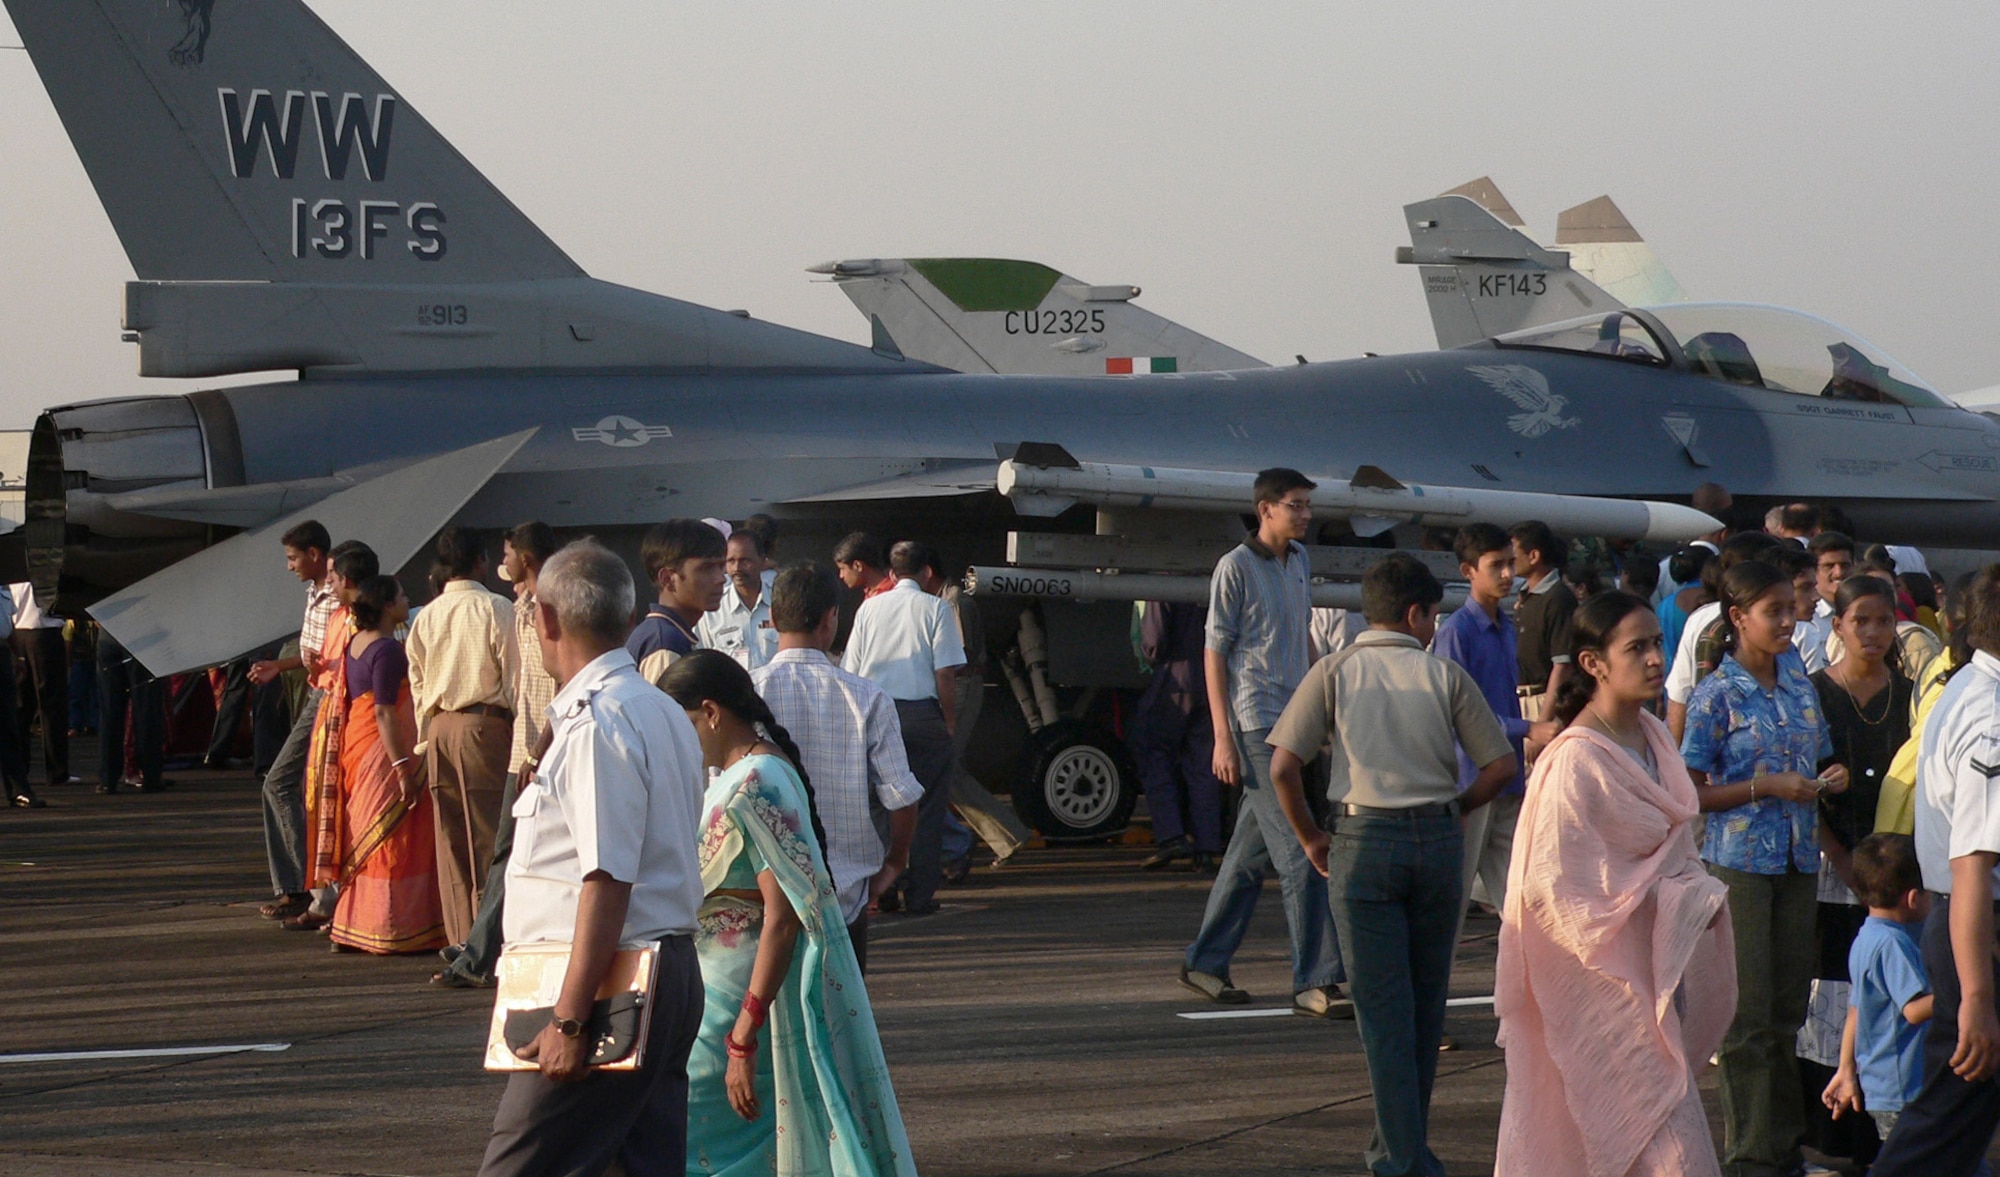 KALAIKUNDA AIR STATION, India (AFPN) -- Civilians flock to the flightline to see displays of U.S. and Indian Air Force aircraft. About 250 U.S. Airmen from five bases are participating in the Cope India exercise. The exercise provides an opportunity for the two air forces to enhance their ability to operate together. (U.S. Air Force photo by Capt. John Redfield) 